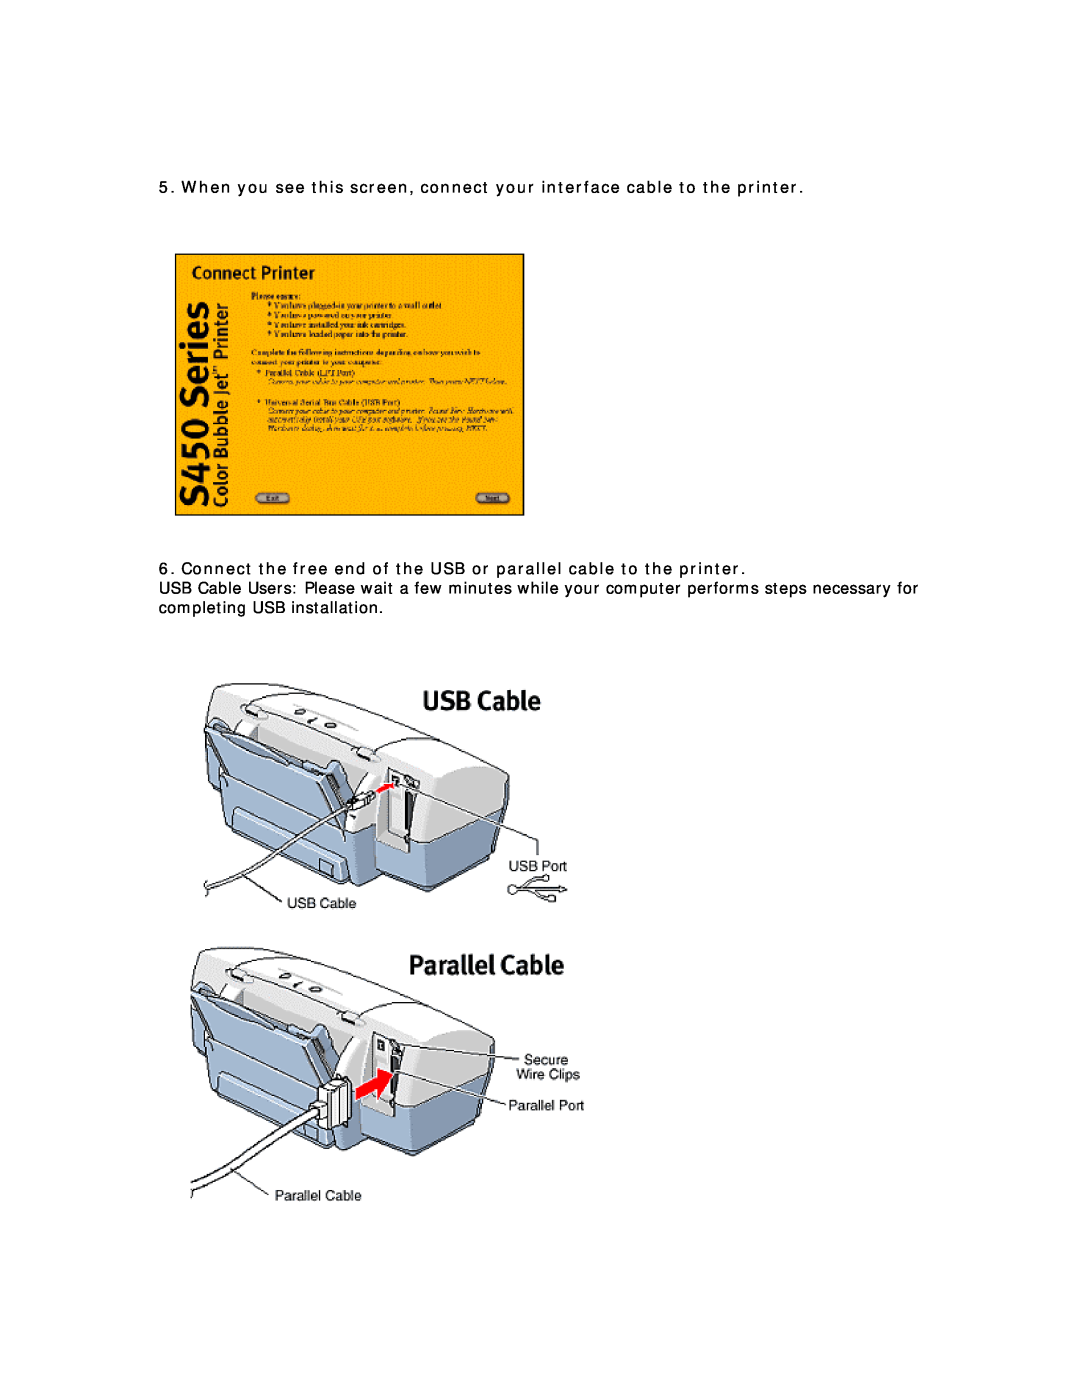 Canon S450 manual Connect the free end of the USB or parallel cable to the printer 